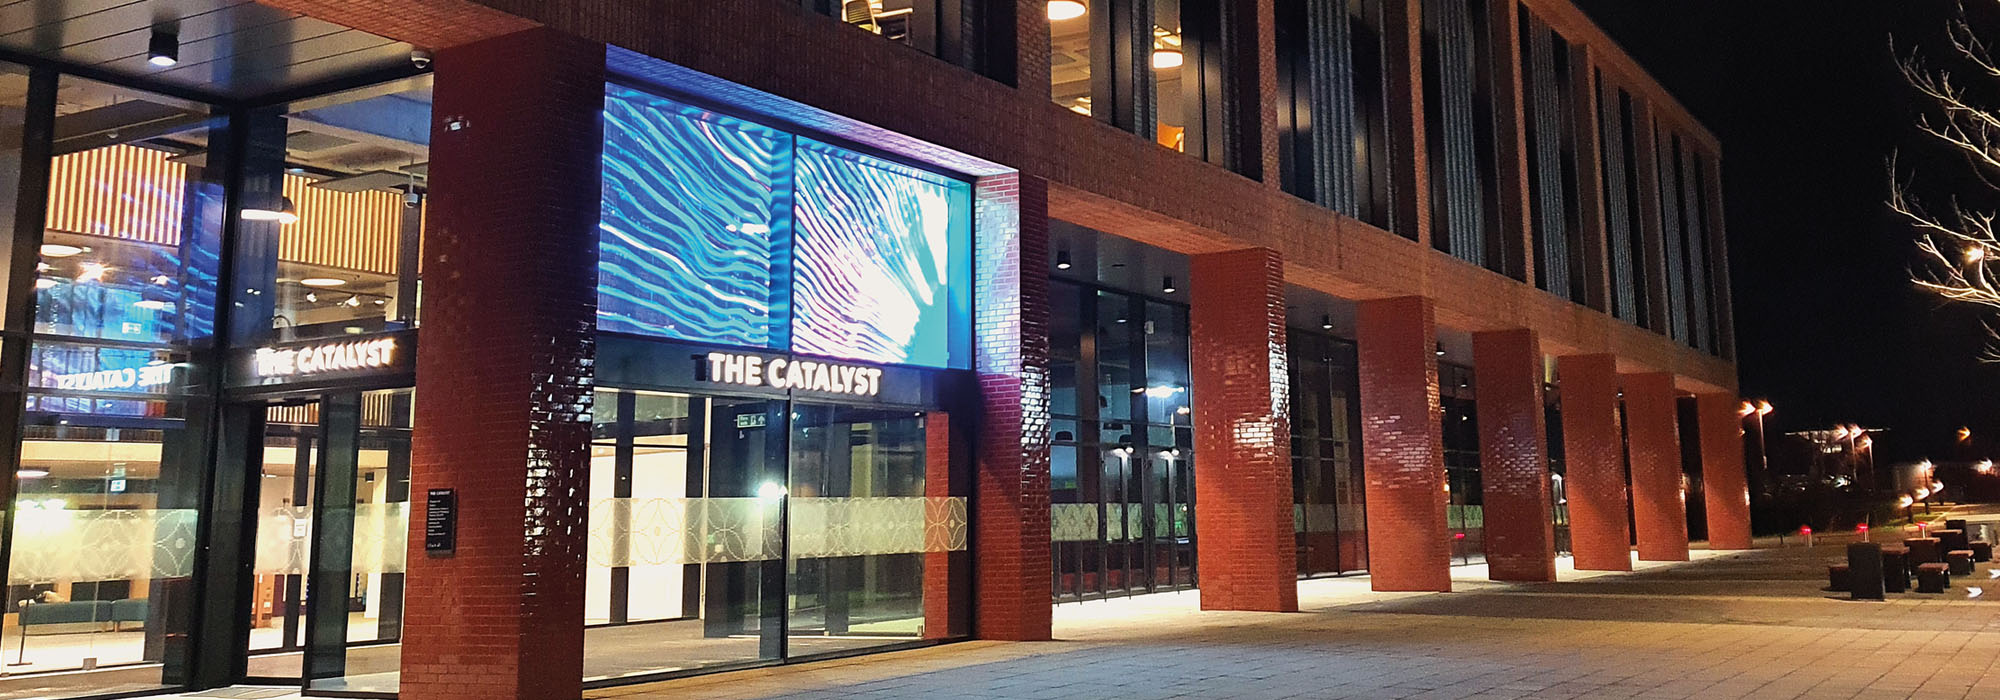 Outside the front entrance of the Catalyst building which is lit up at night time